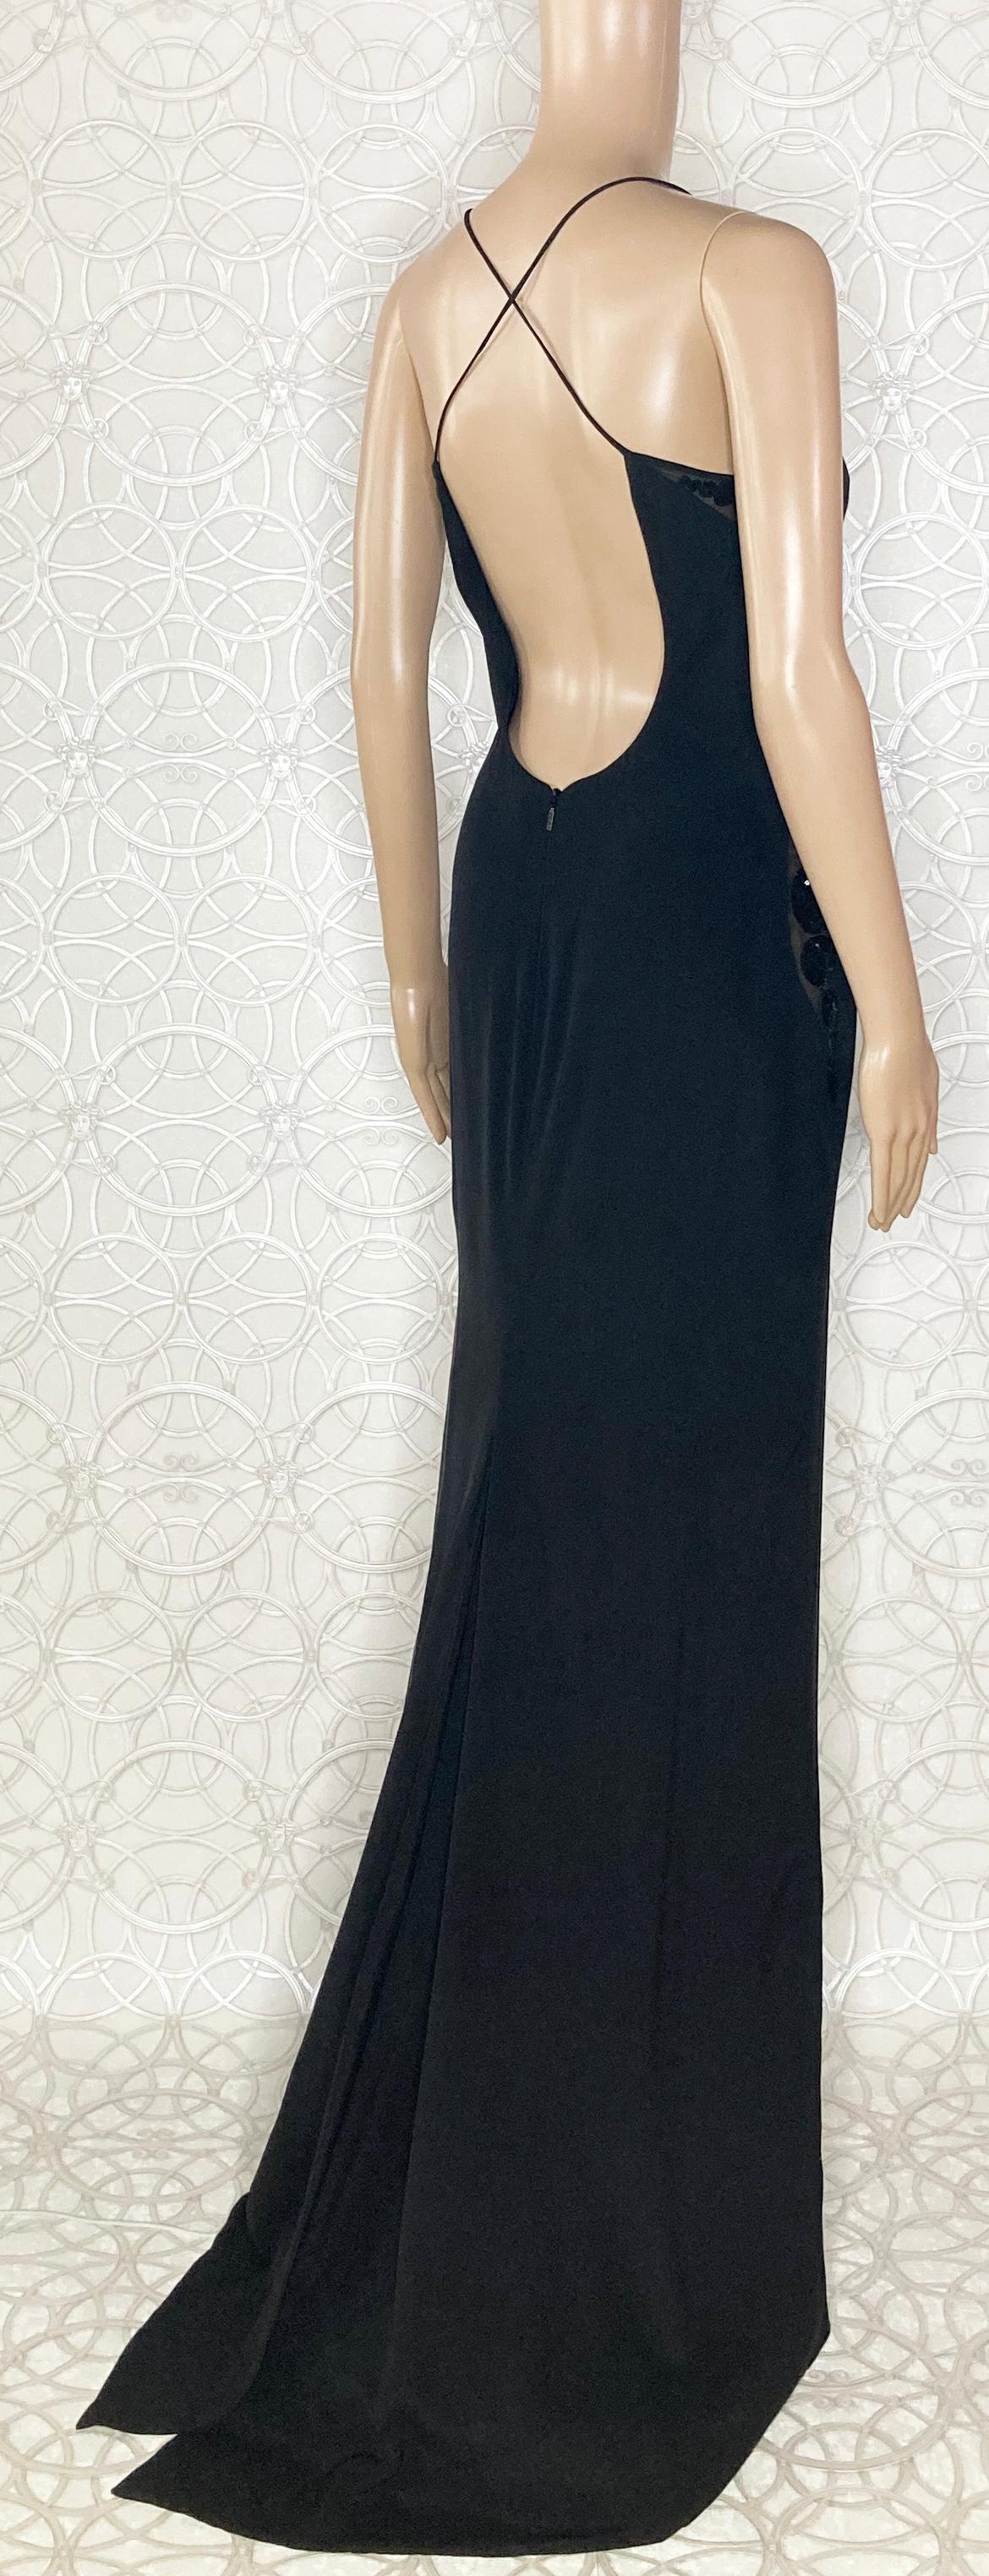 VERSACE BLACK PAILLETE DETAIL and OPEN BACK SILK LONG GOWN Dress 38 -2 For Sale 1